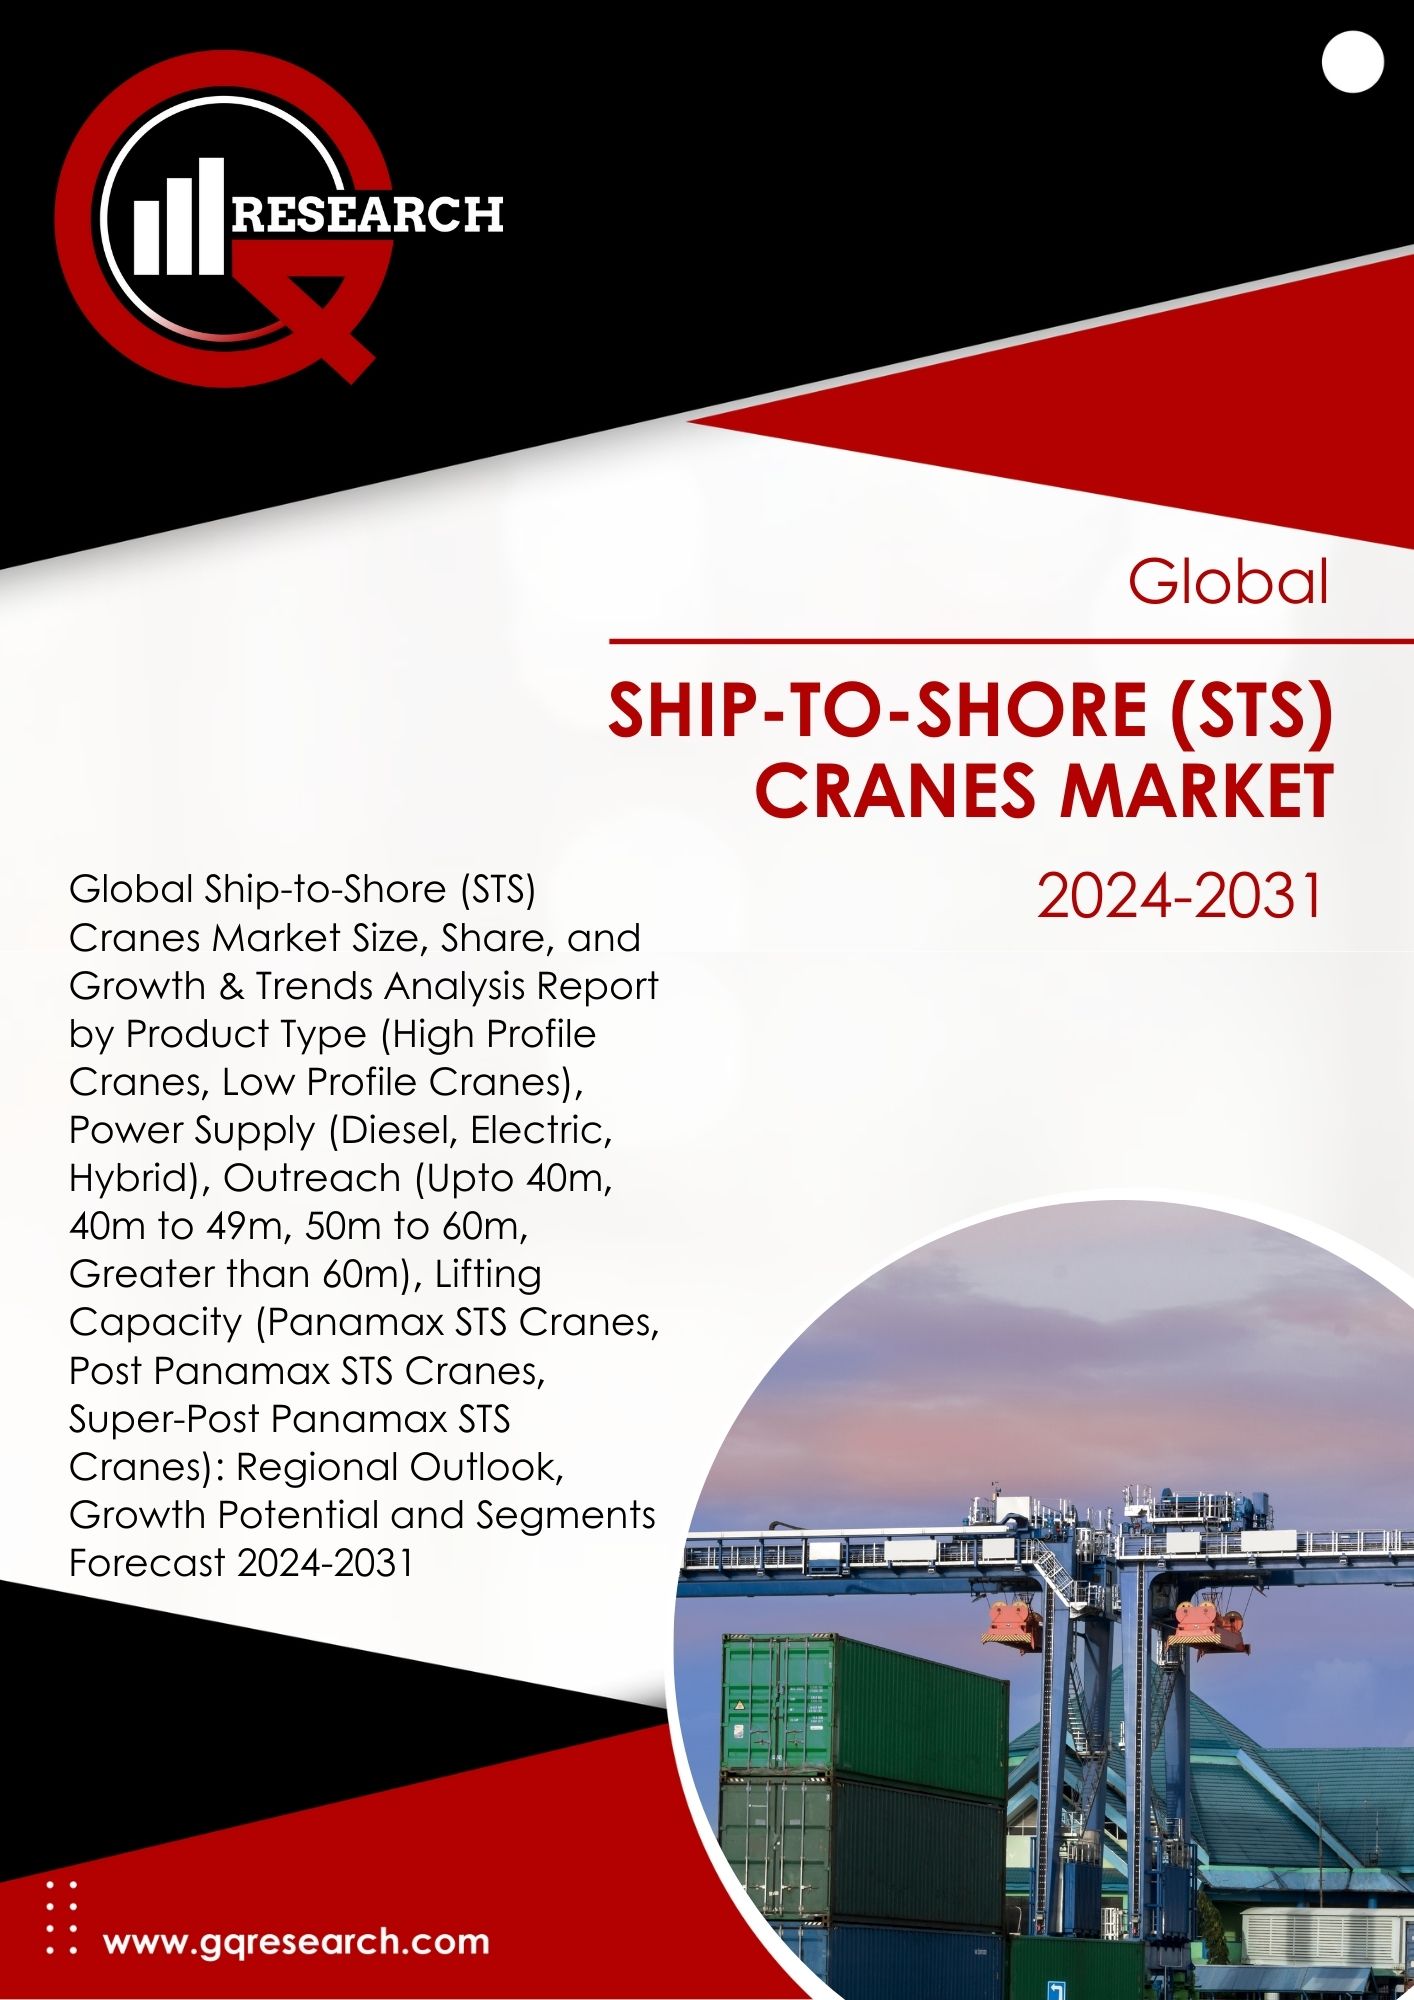 Ship-to-Shore (STS) Cranes Market Size Forecast 2024-2031 | GQ Research